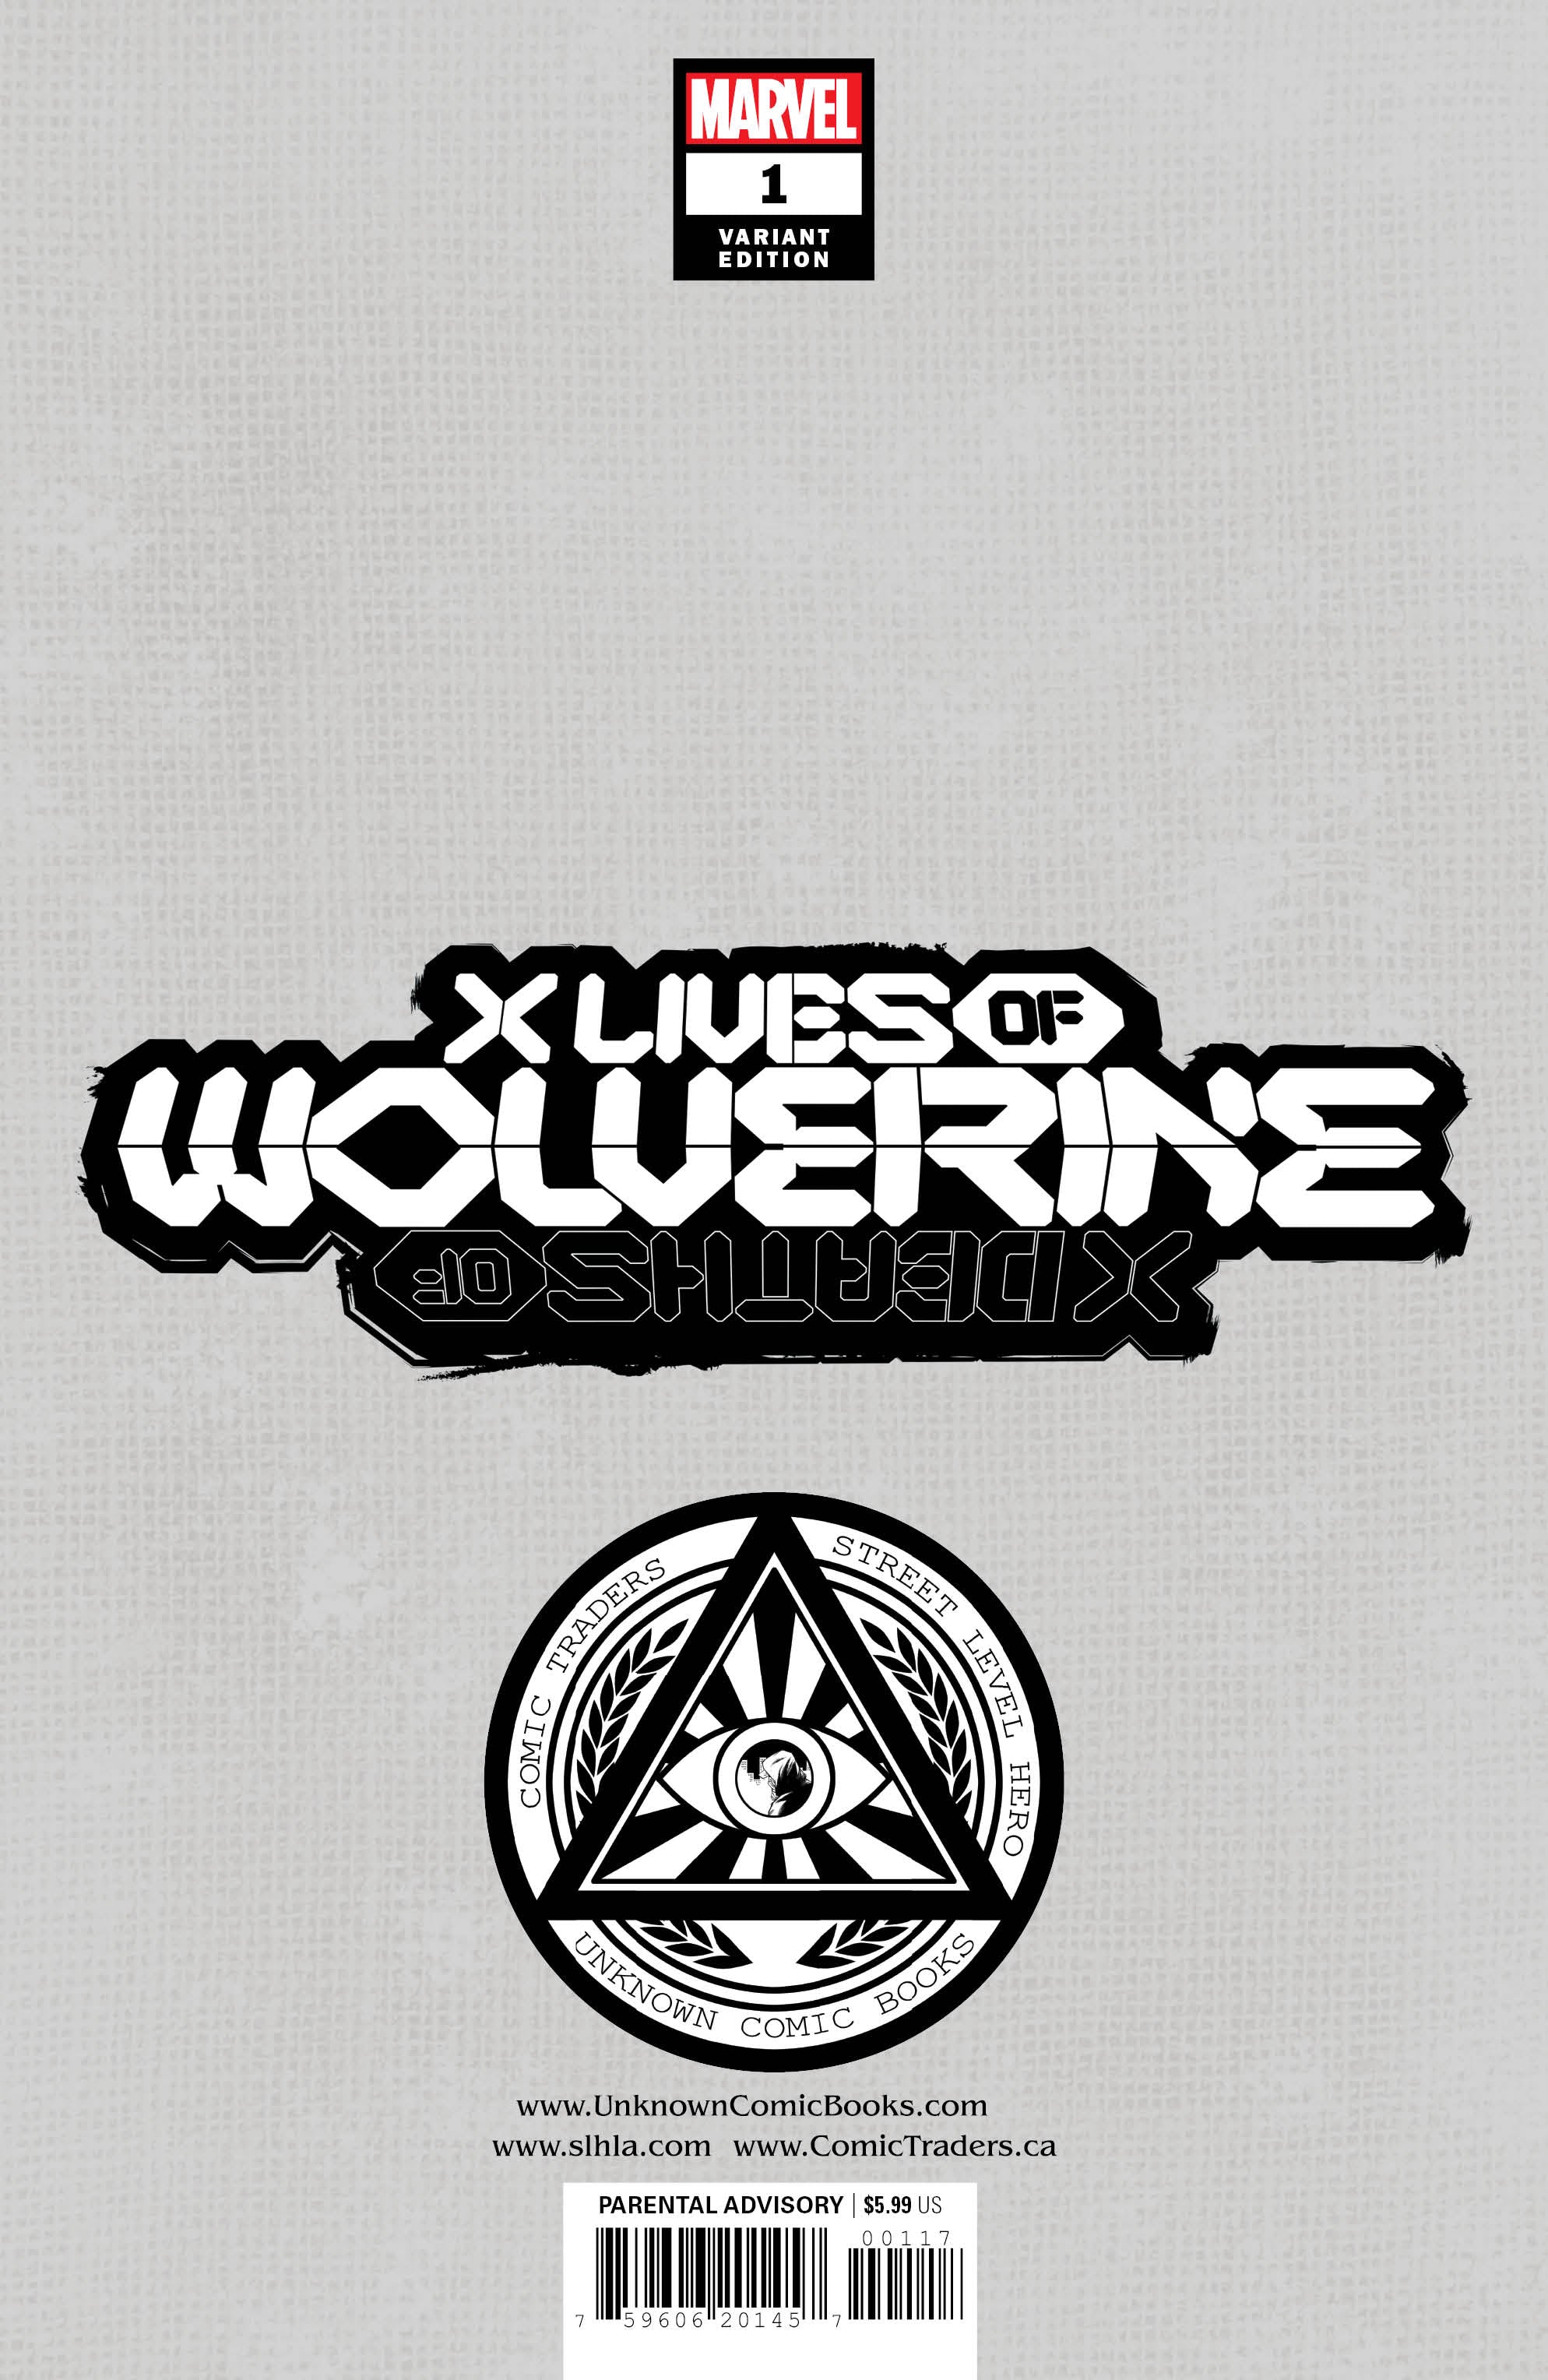 4 PACK X LIVES OF WOLVERINE 1 / X DEATHS OF WOLVERINE 1 UNKNOWN COMICS TYLER KIRKHAM EXCLUSIVE VAR (01/26/2022)